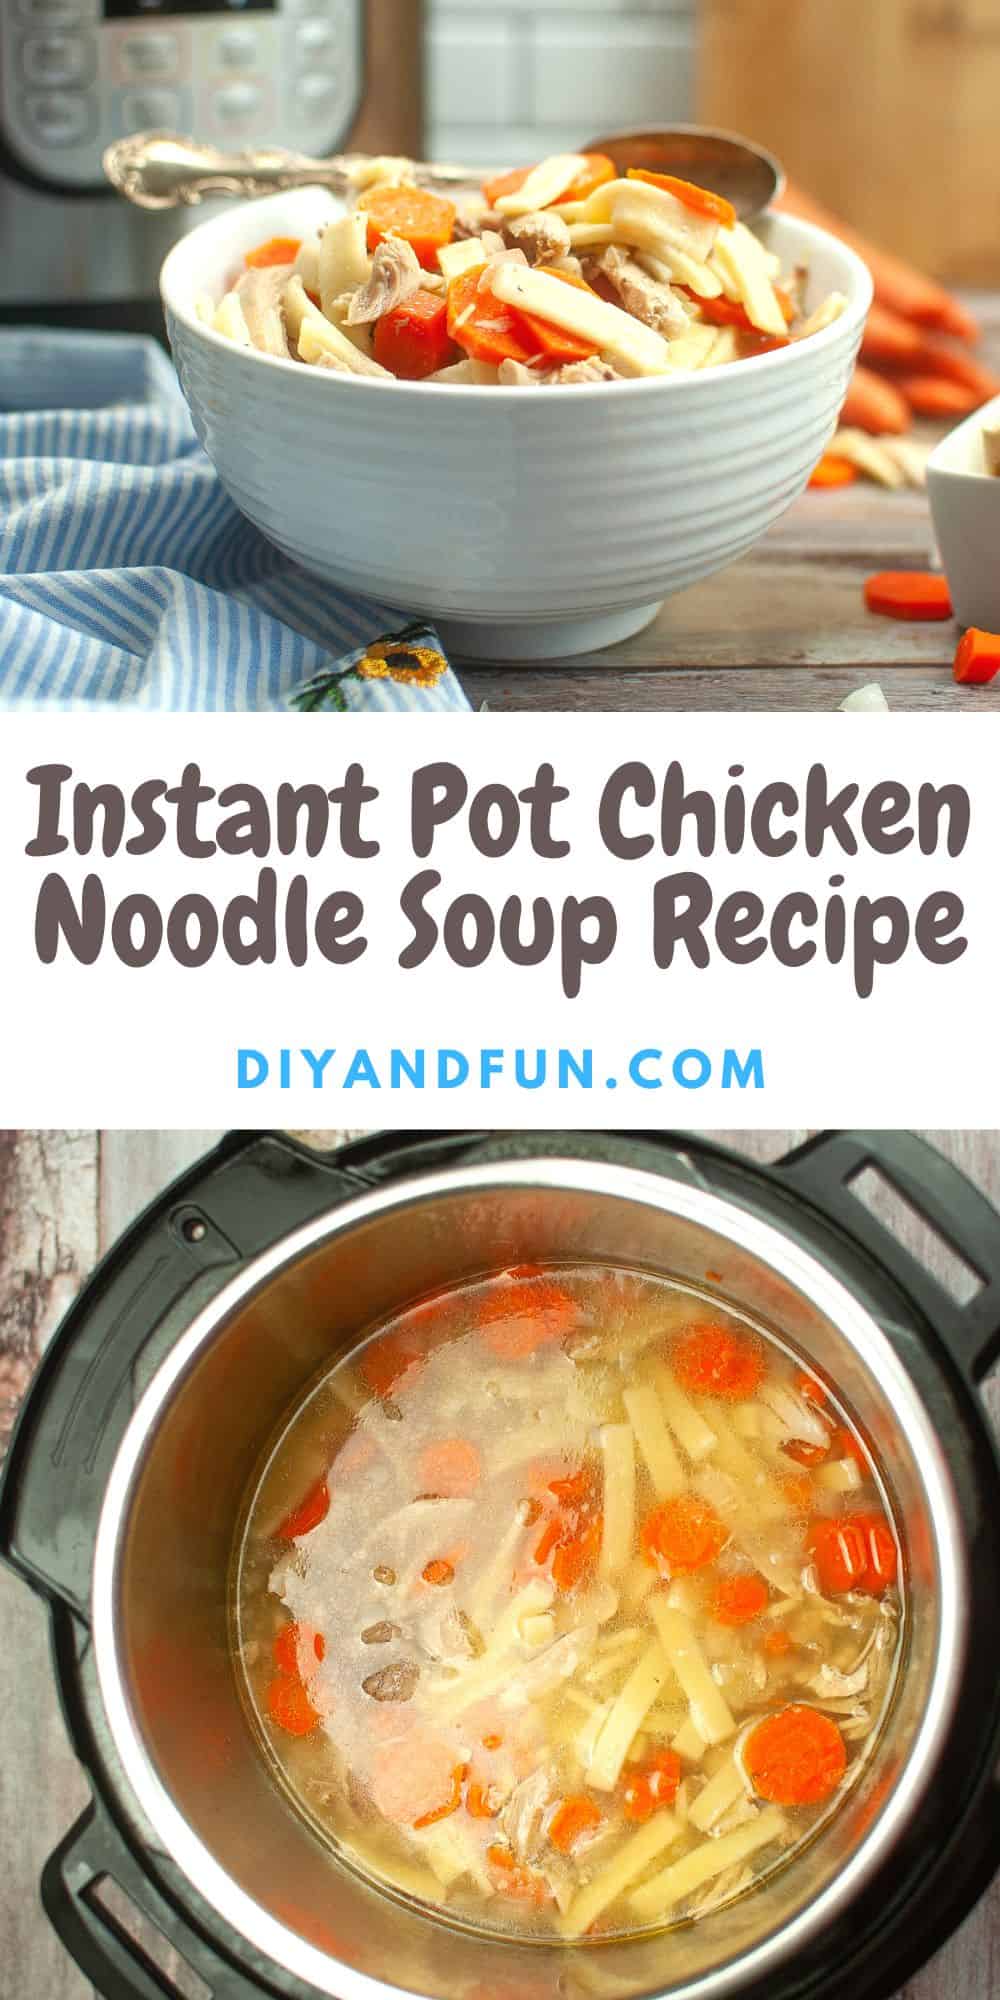 Instant Pot Chicken Noodle Soup Recipe, a simple and delicious recipe for homemade soup made from scratch in a pressure cooker.